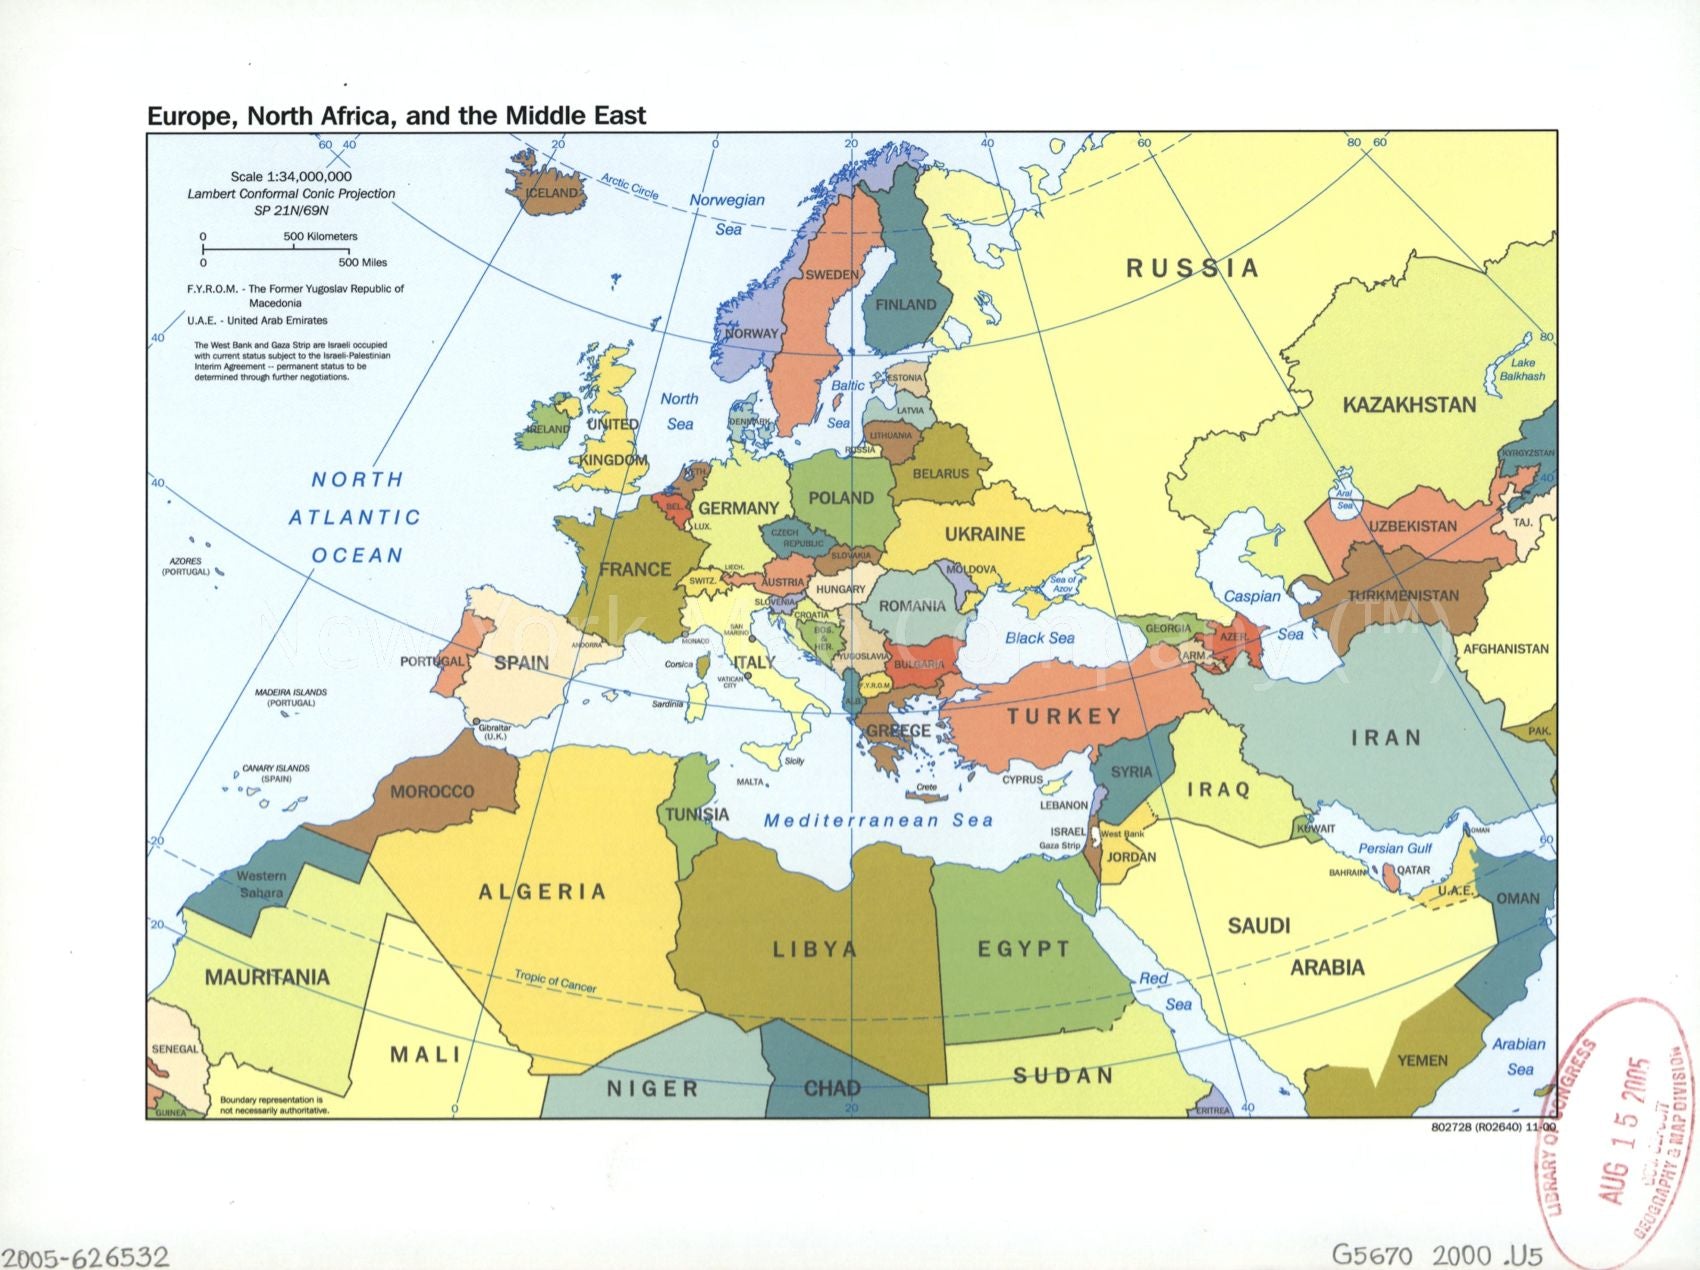 2000 map Europe, North Africa, and the Middle East. Map Subjects: Africa | North | Eastern Hemisphere | Europe | Middle East